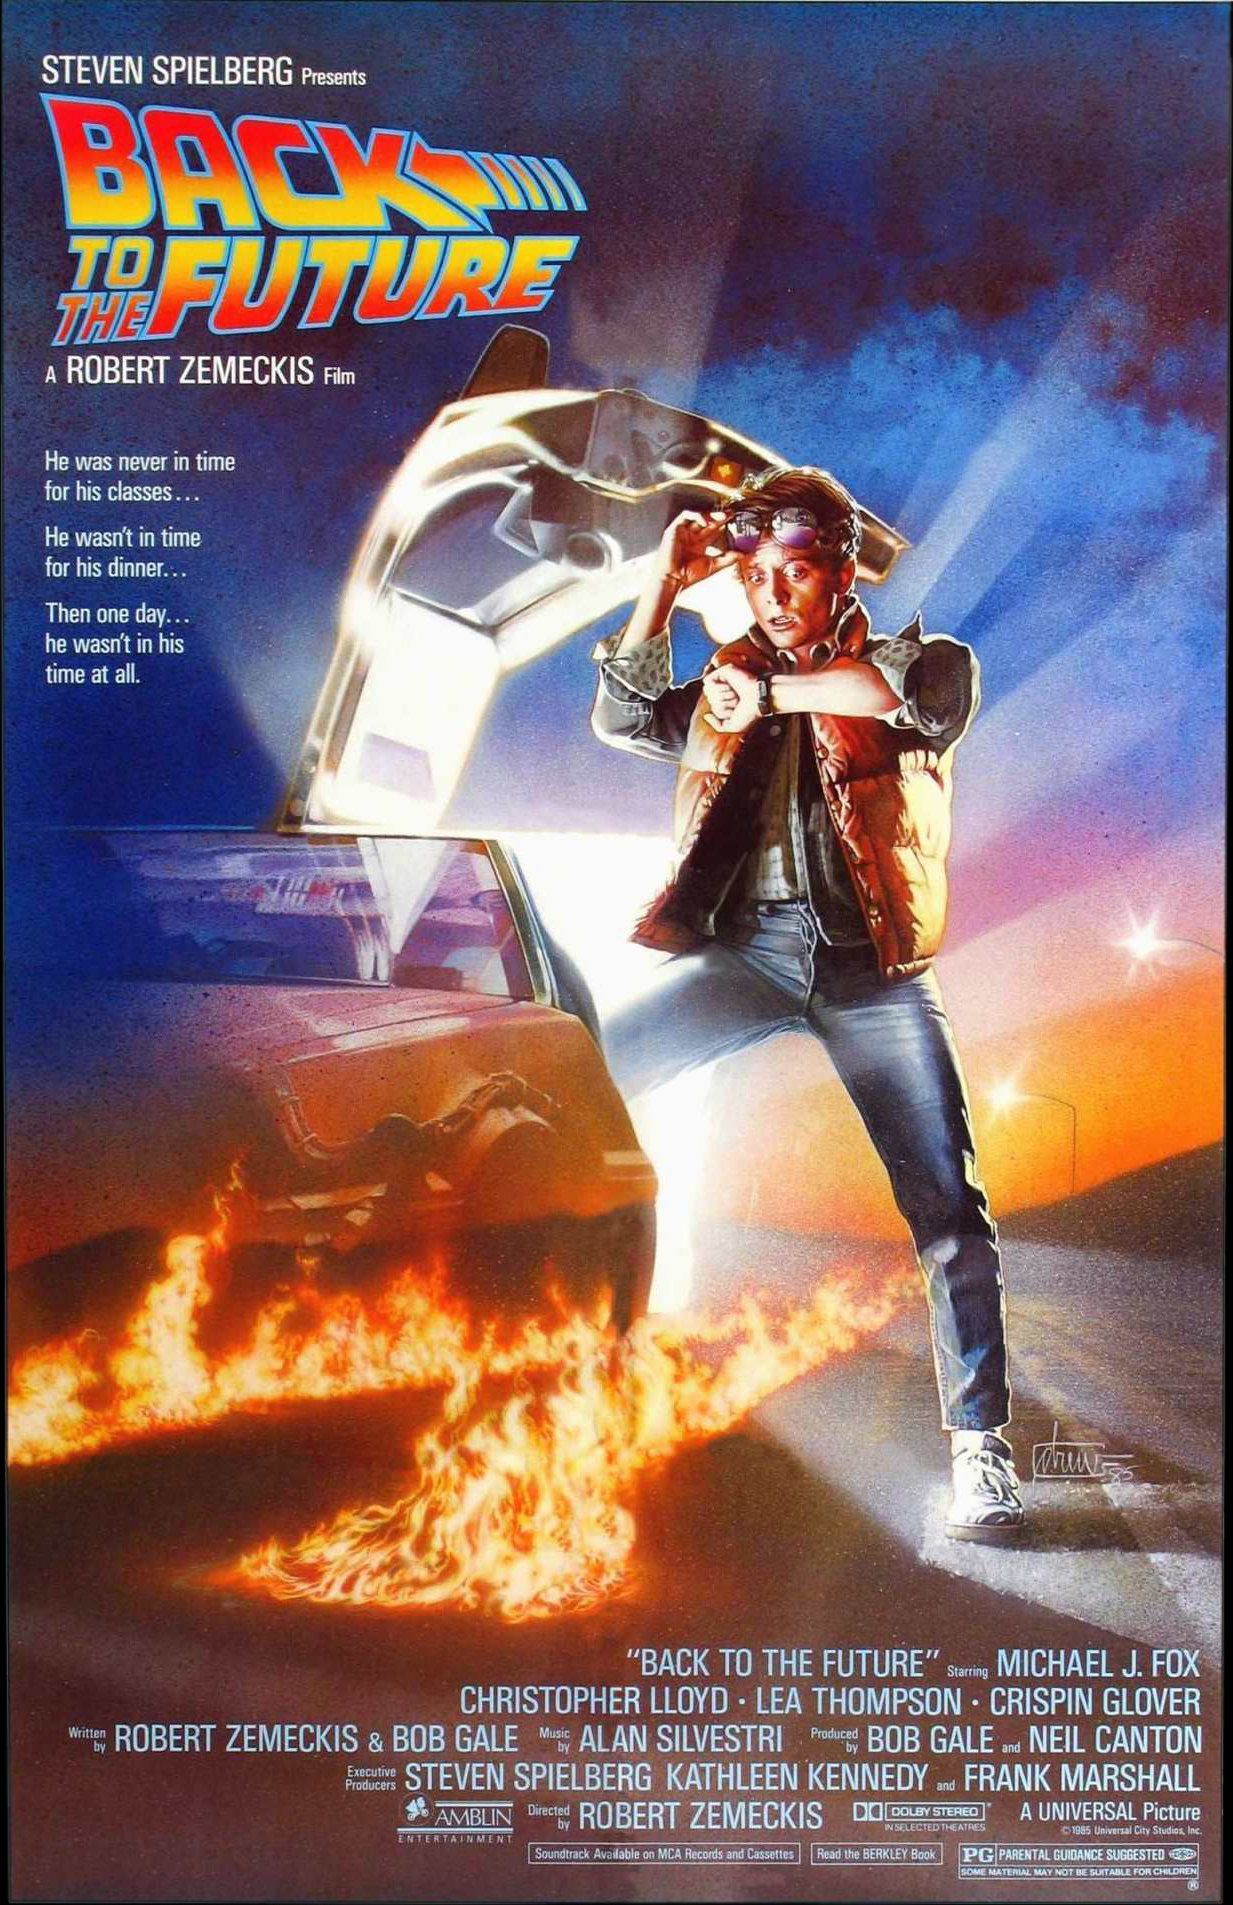 1985 – Back to the Future – A teenager is accidentally sent 30 years into the past in a time-traveling DeLorean invented by his